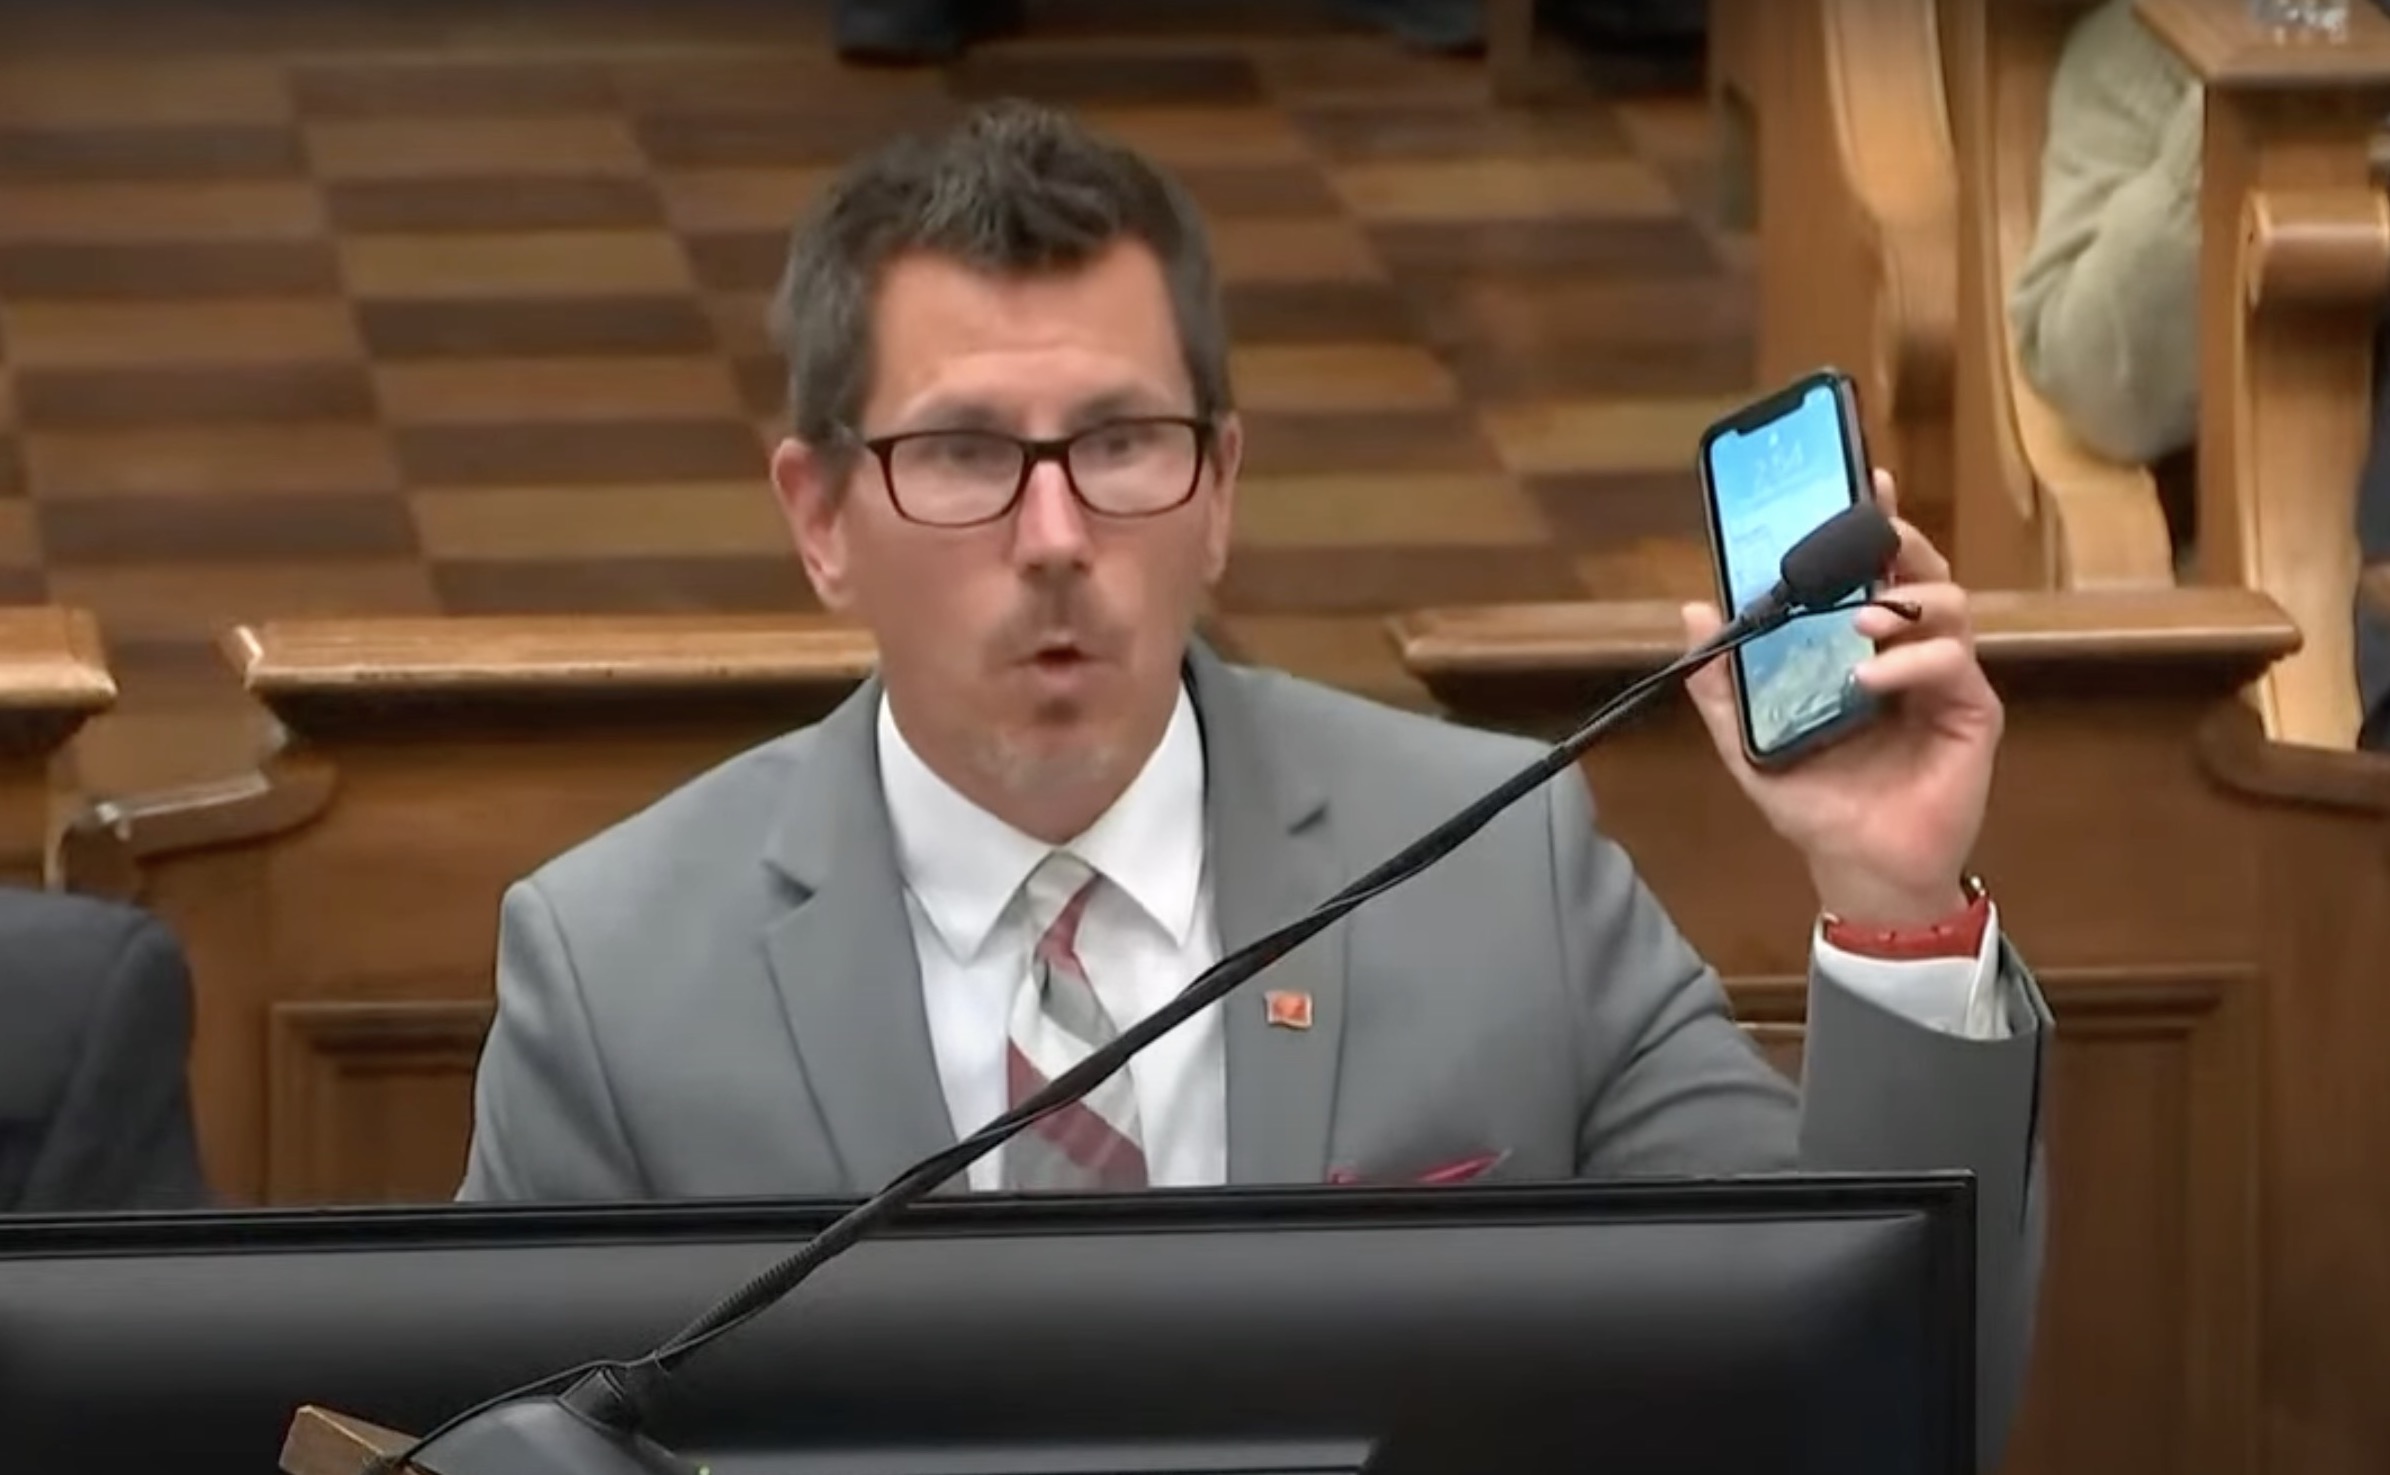 Kenosha County prosecutor Thomas Binger holds up his iPhone while arguing that pinch-to-zoom should be allowed when showing video during cross-examination in this screenshot from the Washington Post's livestream.